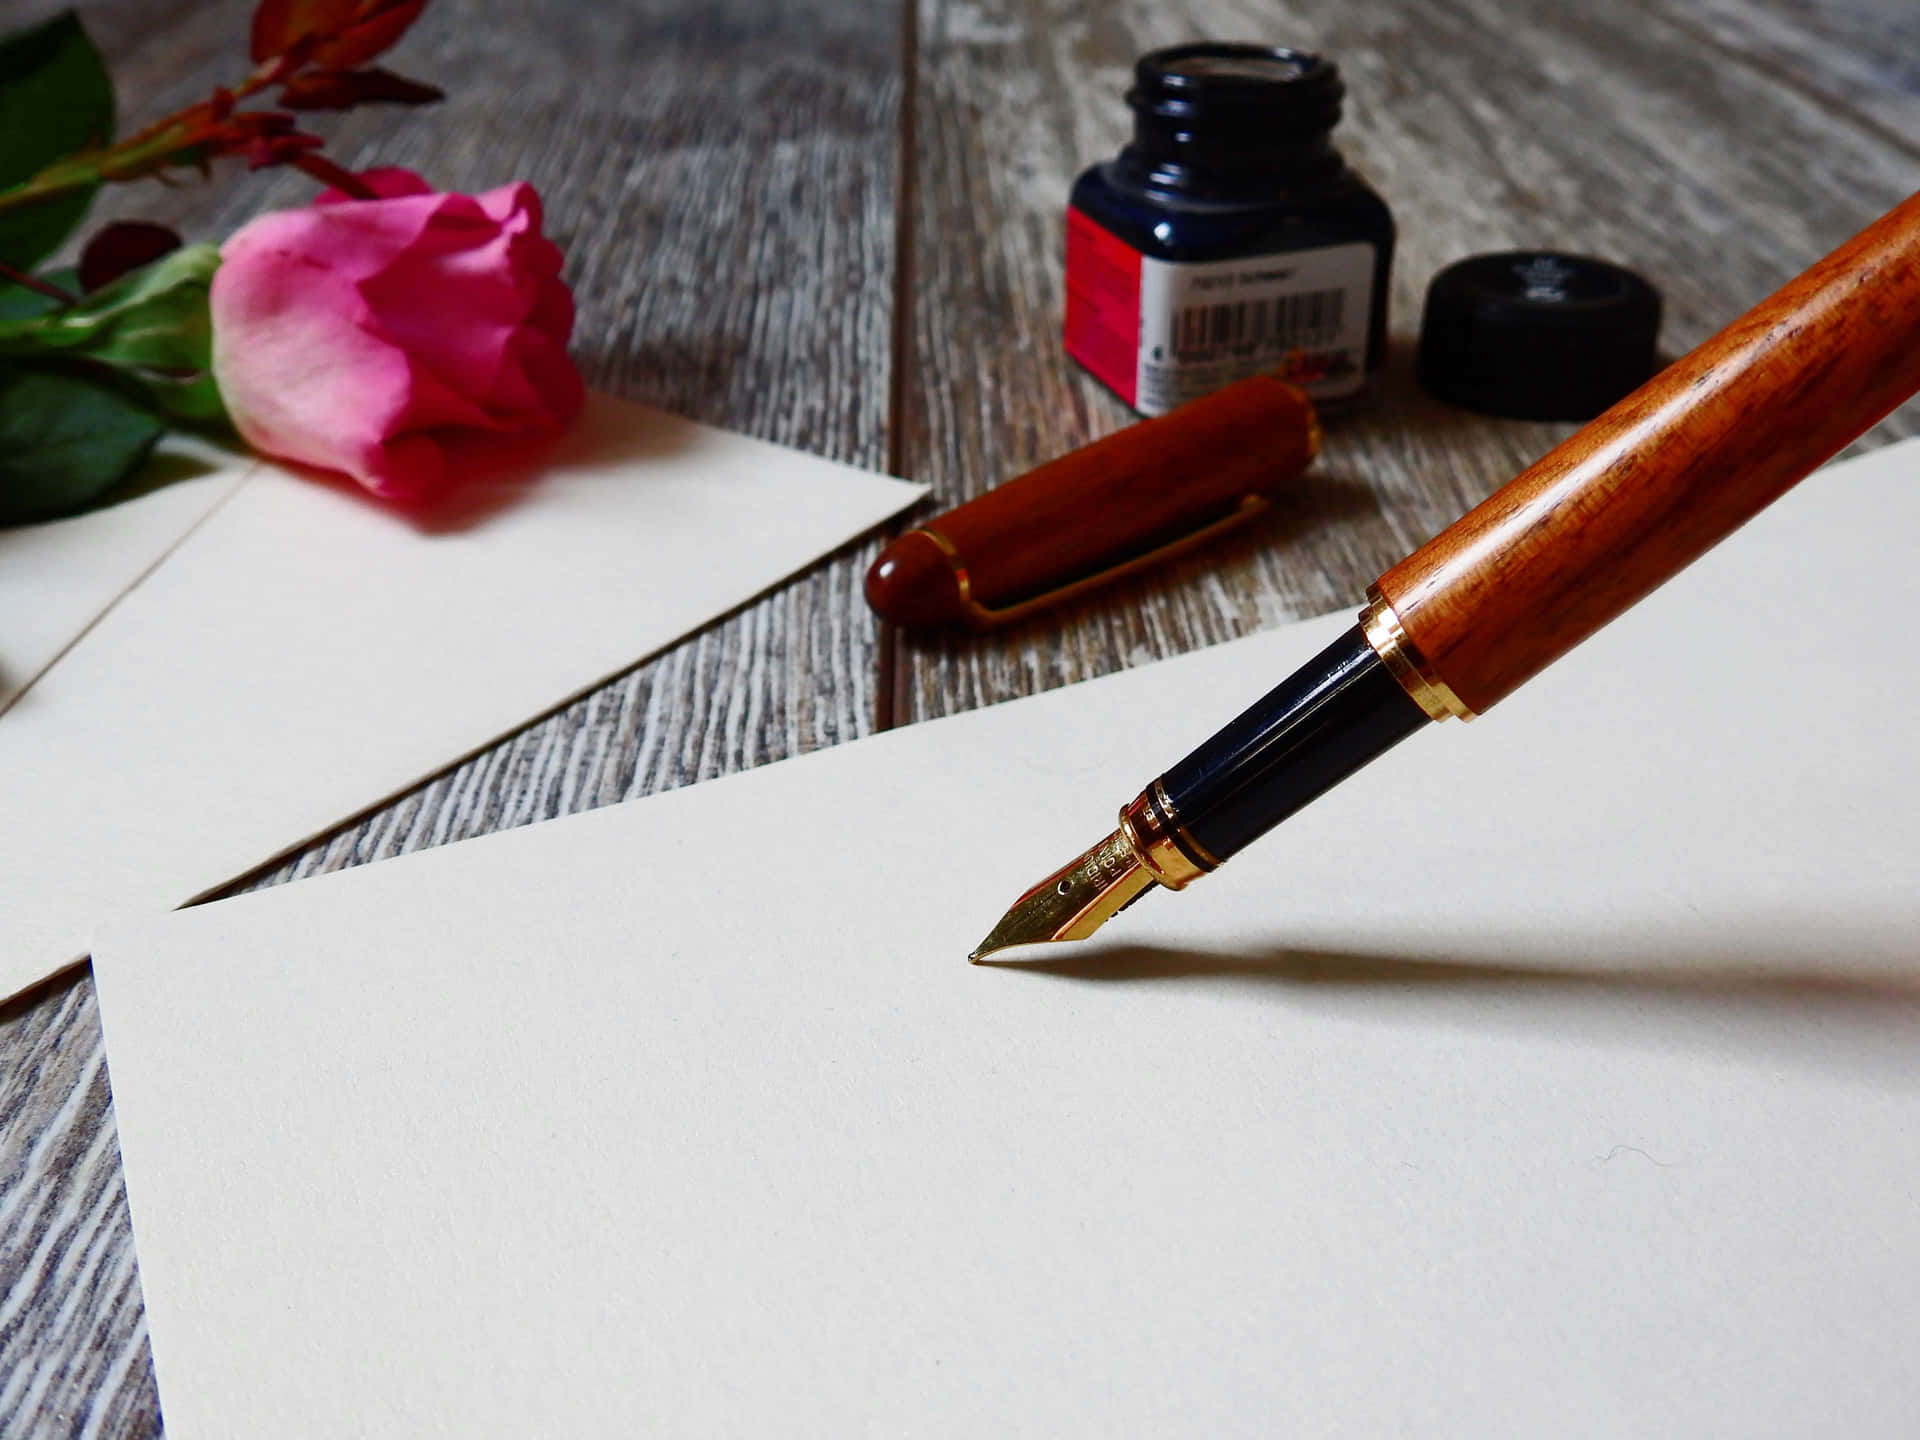 Get Creative and Write Your Story with This Pen